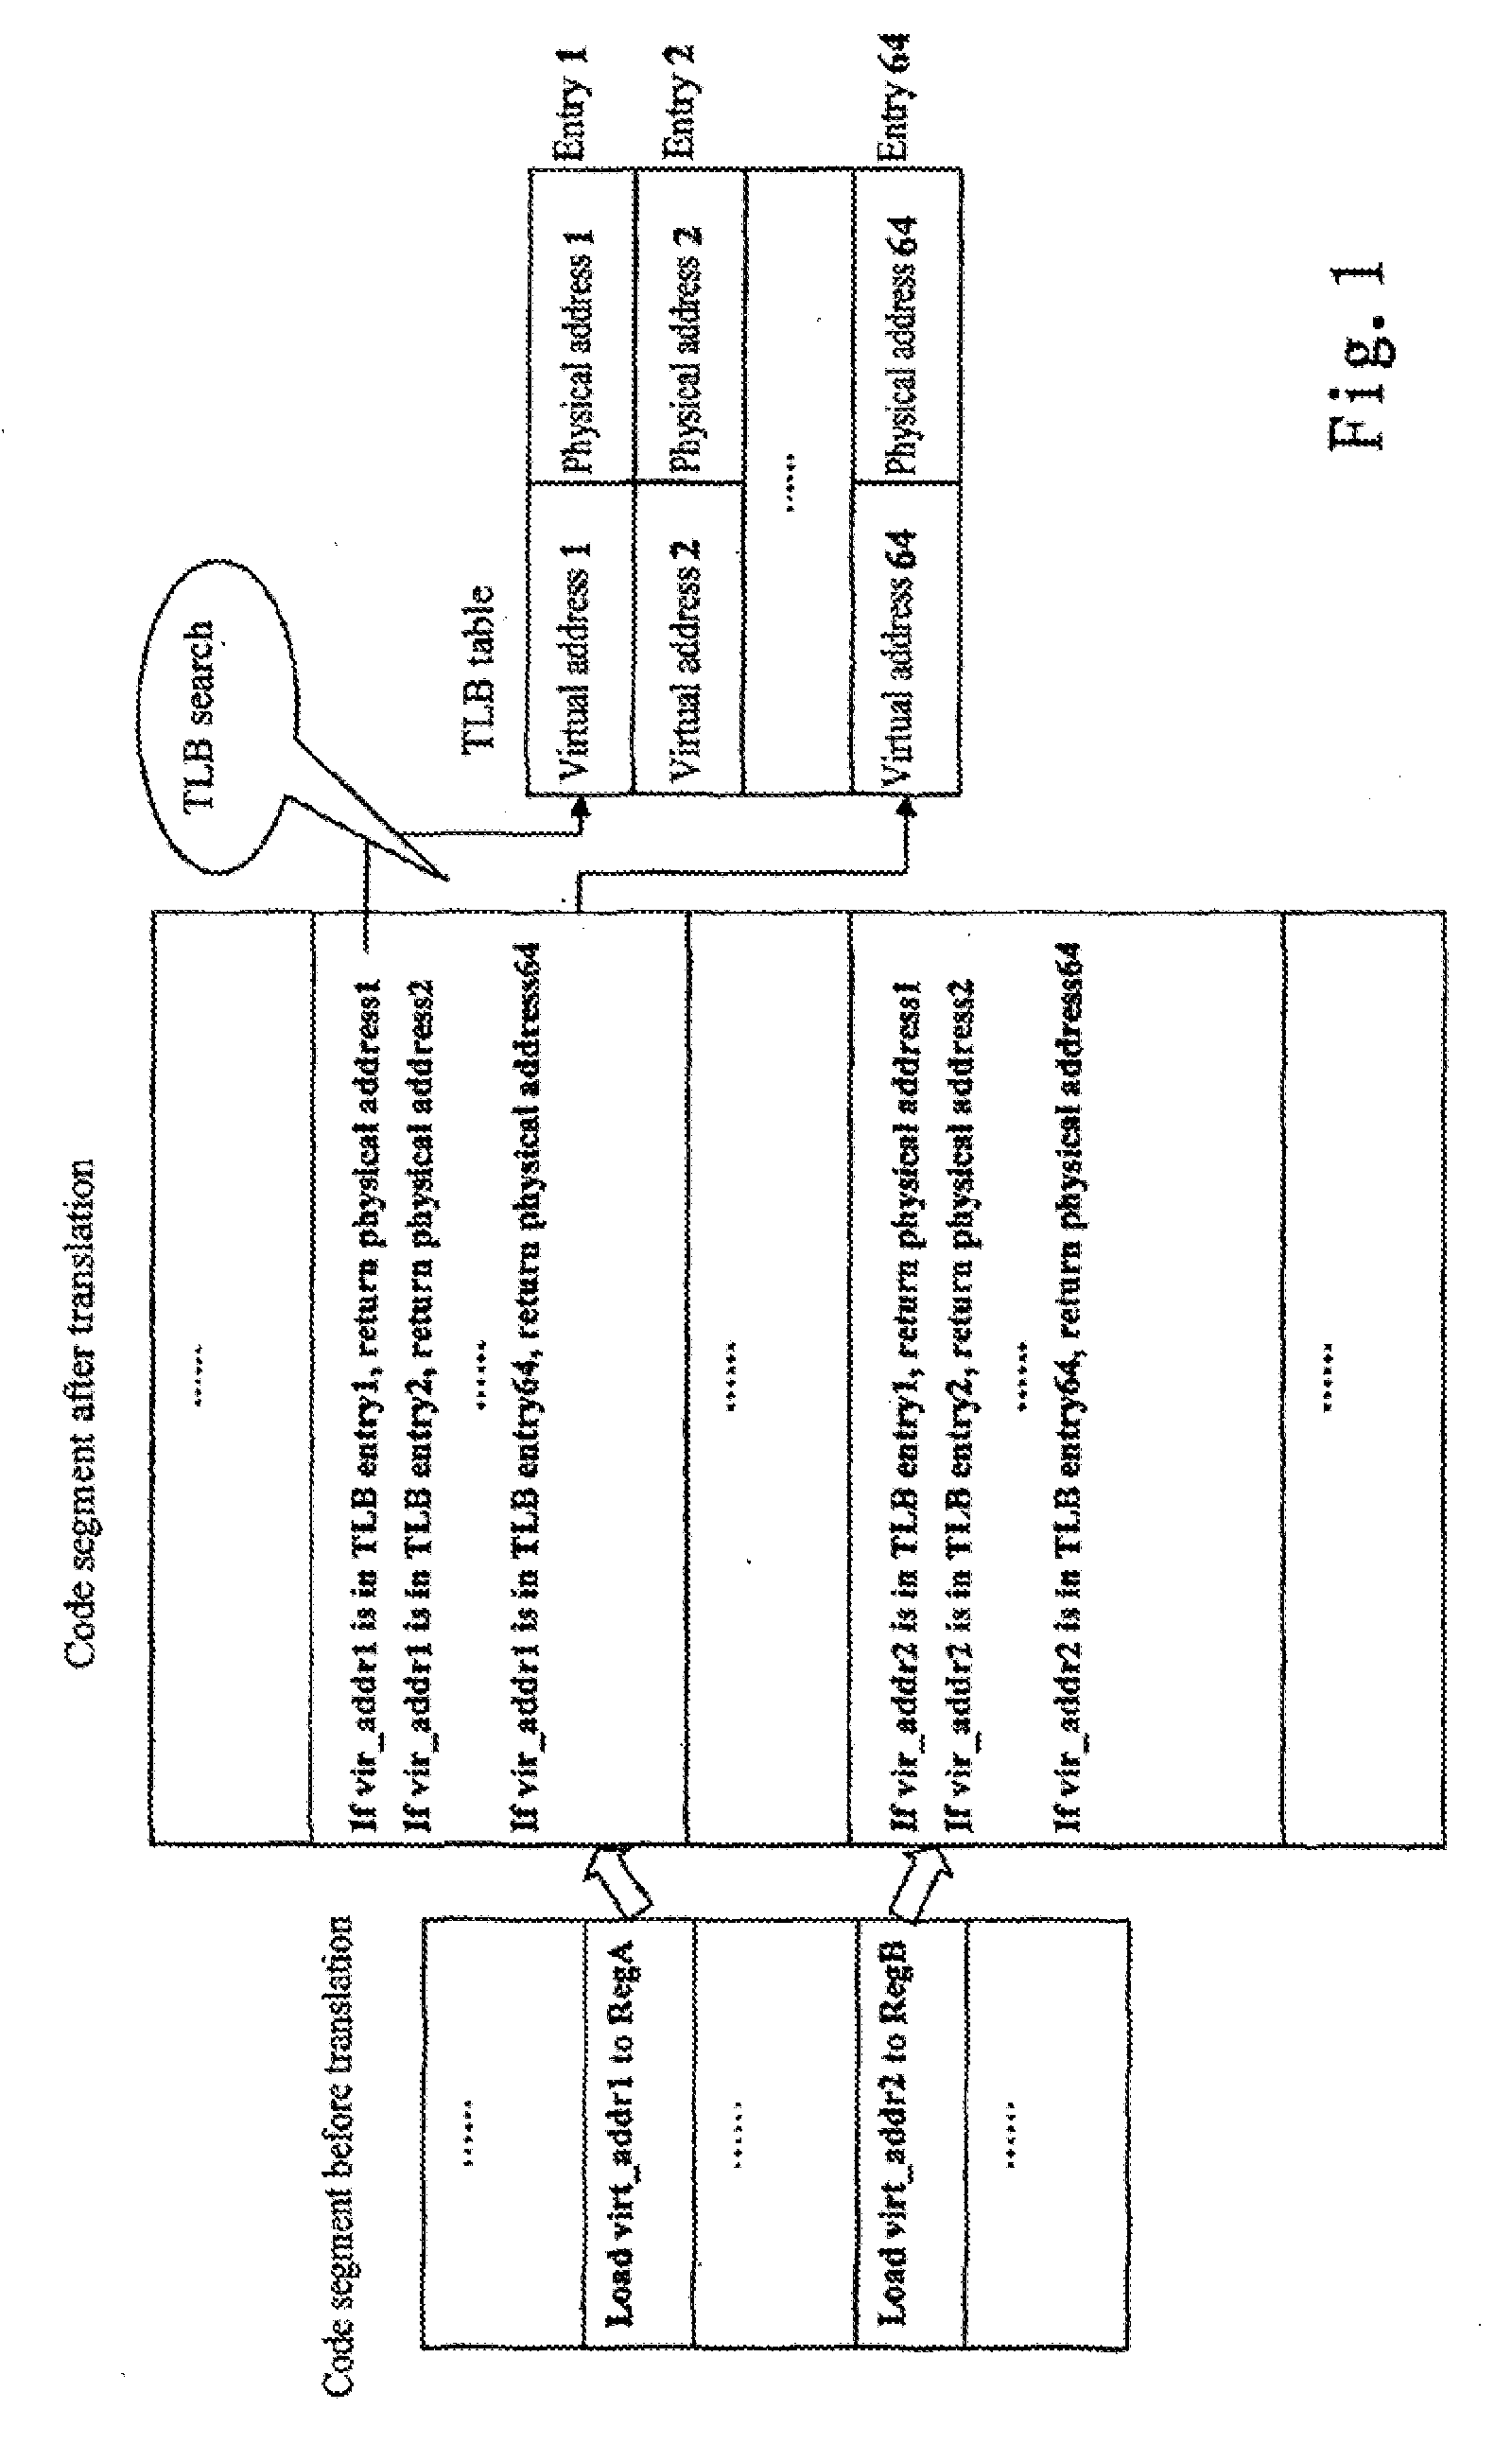 Apparatus and method for executing rapid memory management unit emulation and full-system simulator